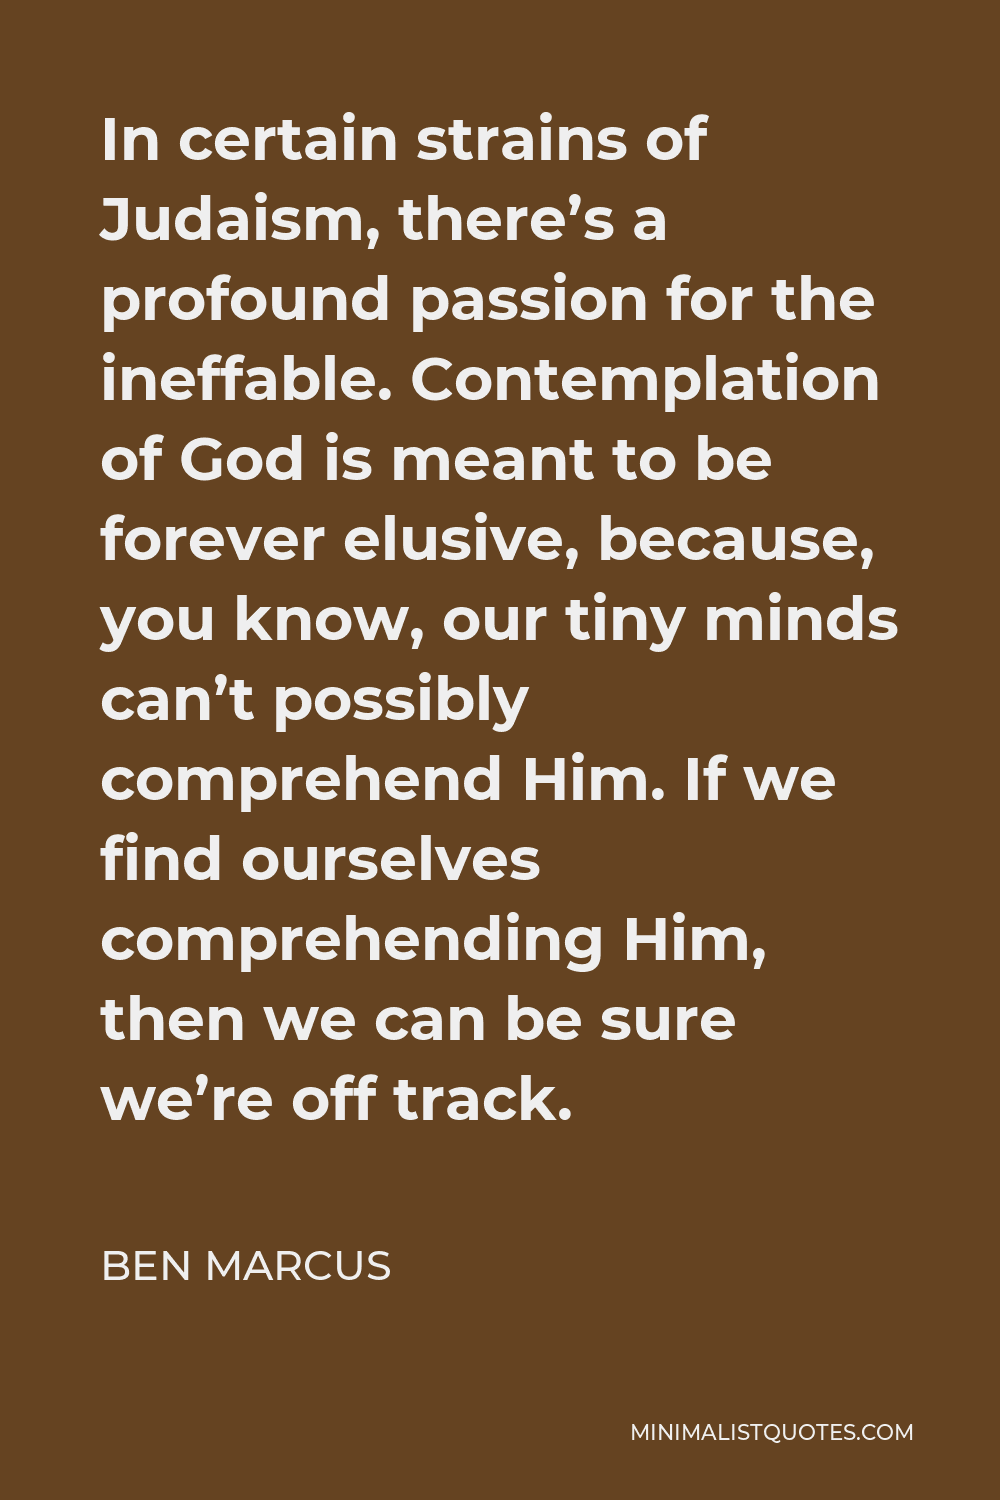 Ben Marcus Quote - In certain strains of Judaism, there’s a profound passion for the ineffable. Contemplation of God is meant to be forever elusive, because, you know, our tiny minds can’t possibly comprehend Him. If we find ourselves comprehending Him, then we can be sure we’re off track.